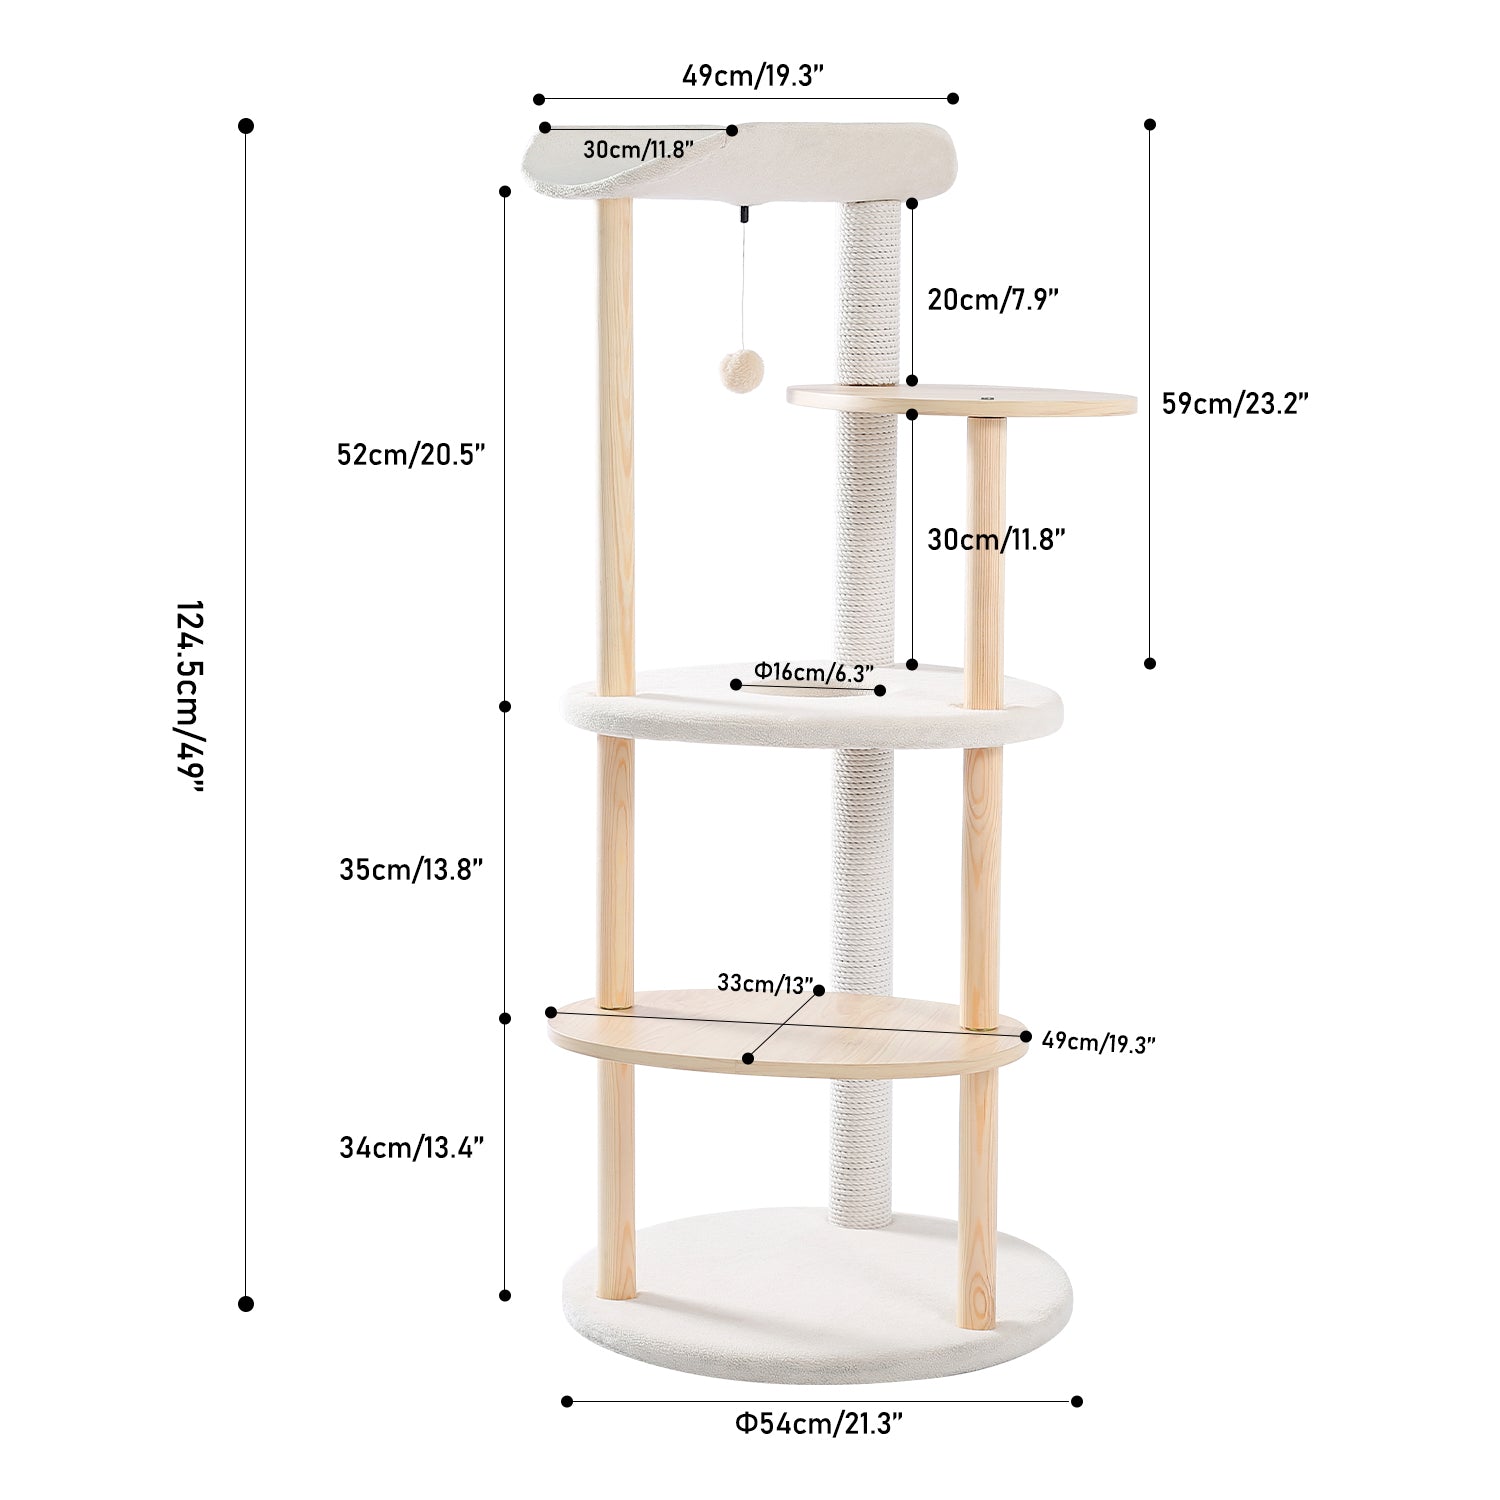 Multi-Level Cat Tree Modern Cat Tower Wooden Activity Center with Scratching Posts Beige